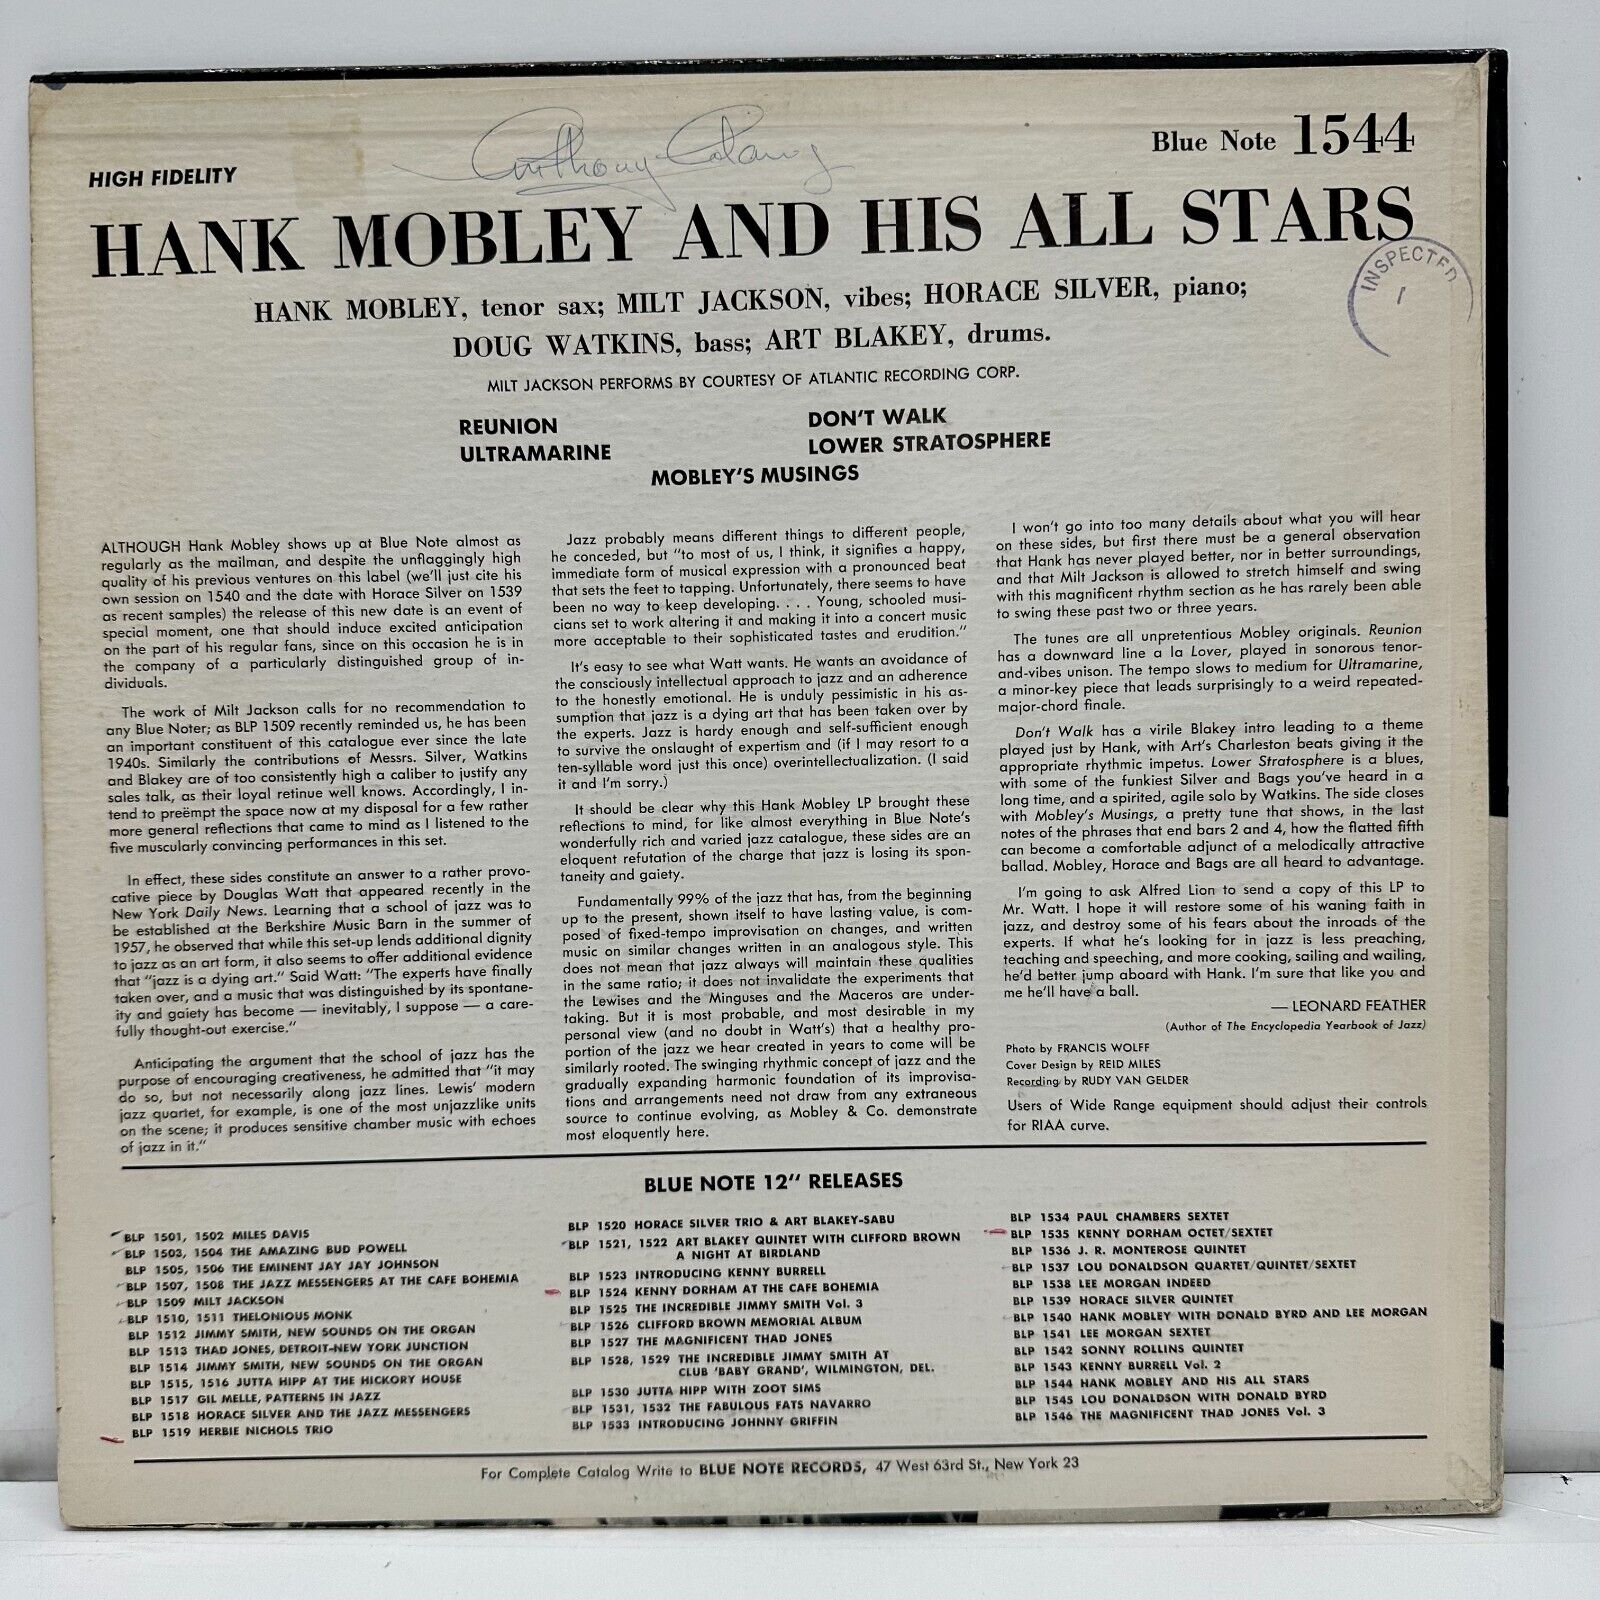 Pic 1 Hank Mobley on Blue Note 1544